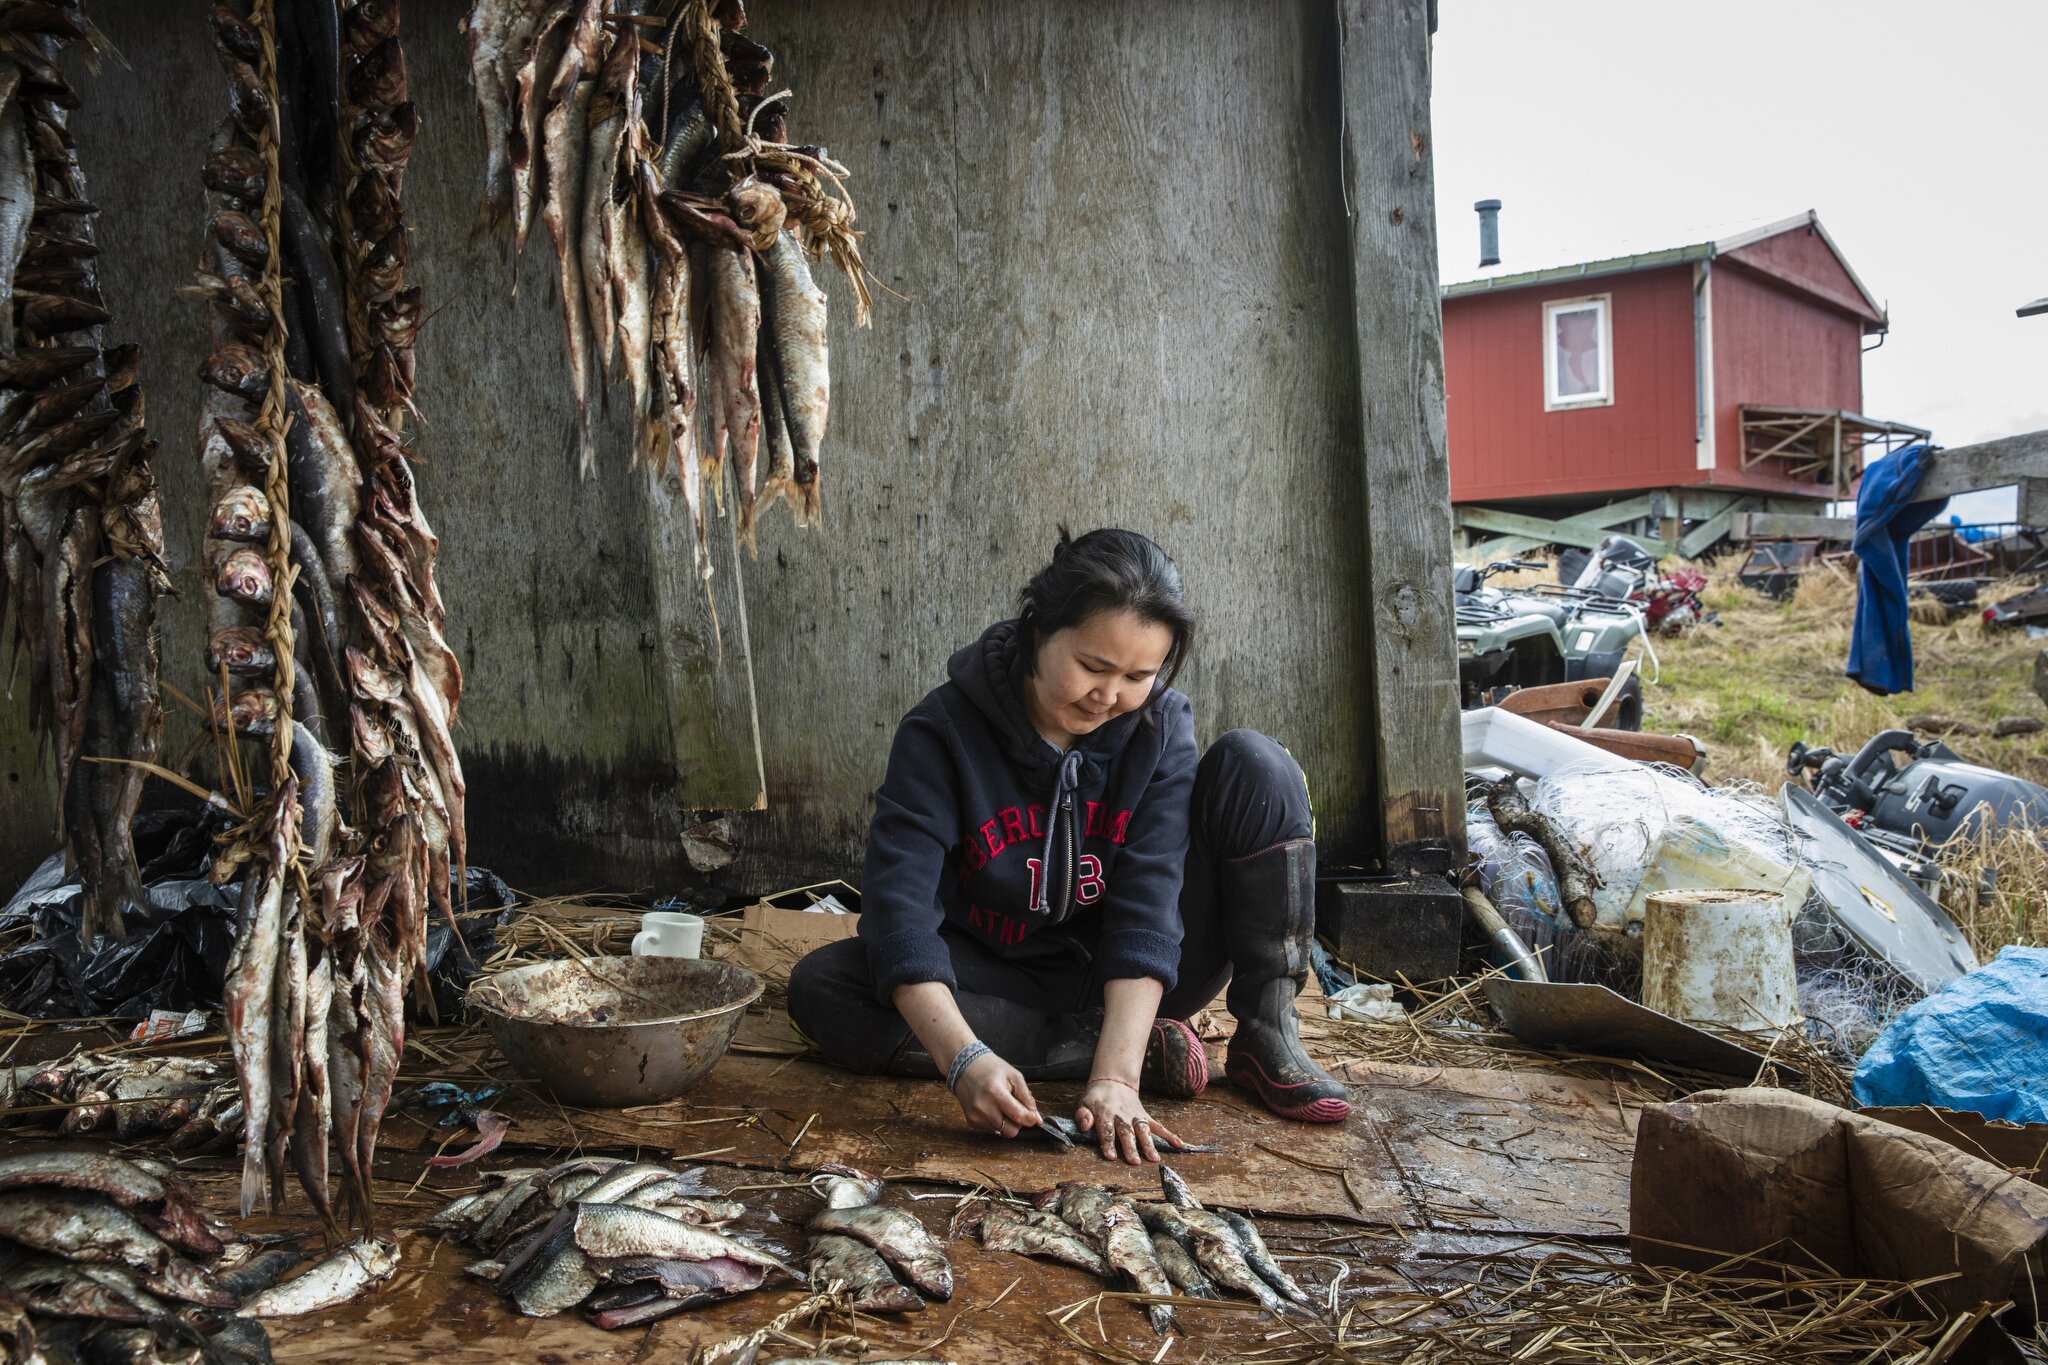  Naun Lala braids freshly caught river herring in order to dry the fish out in the sun in Newtok, Alaska, a Yupik village of roughly 380 people. May 26th, 2019. Subsistence-based practices such as gathering eggs, hunting, and fishing are a way of lif